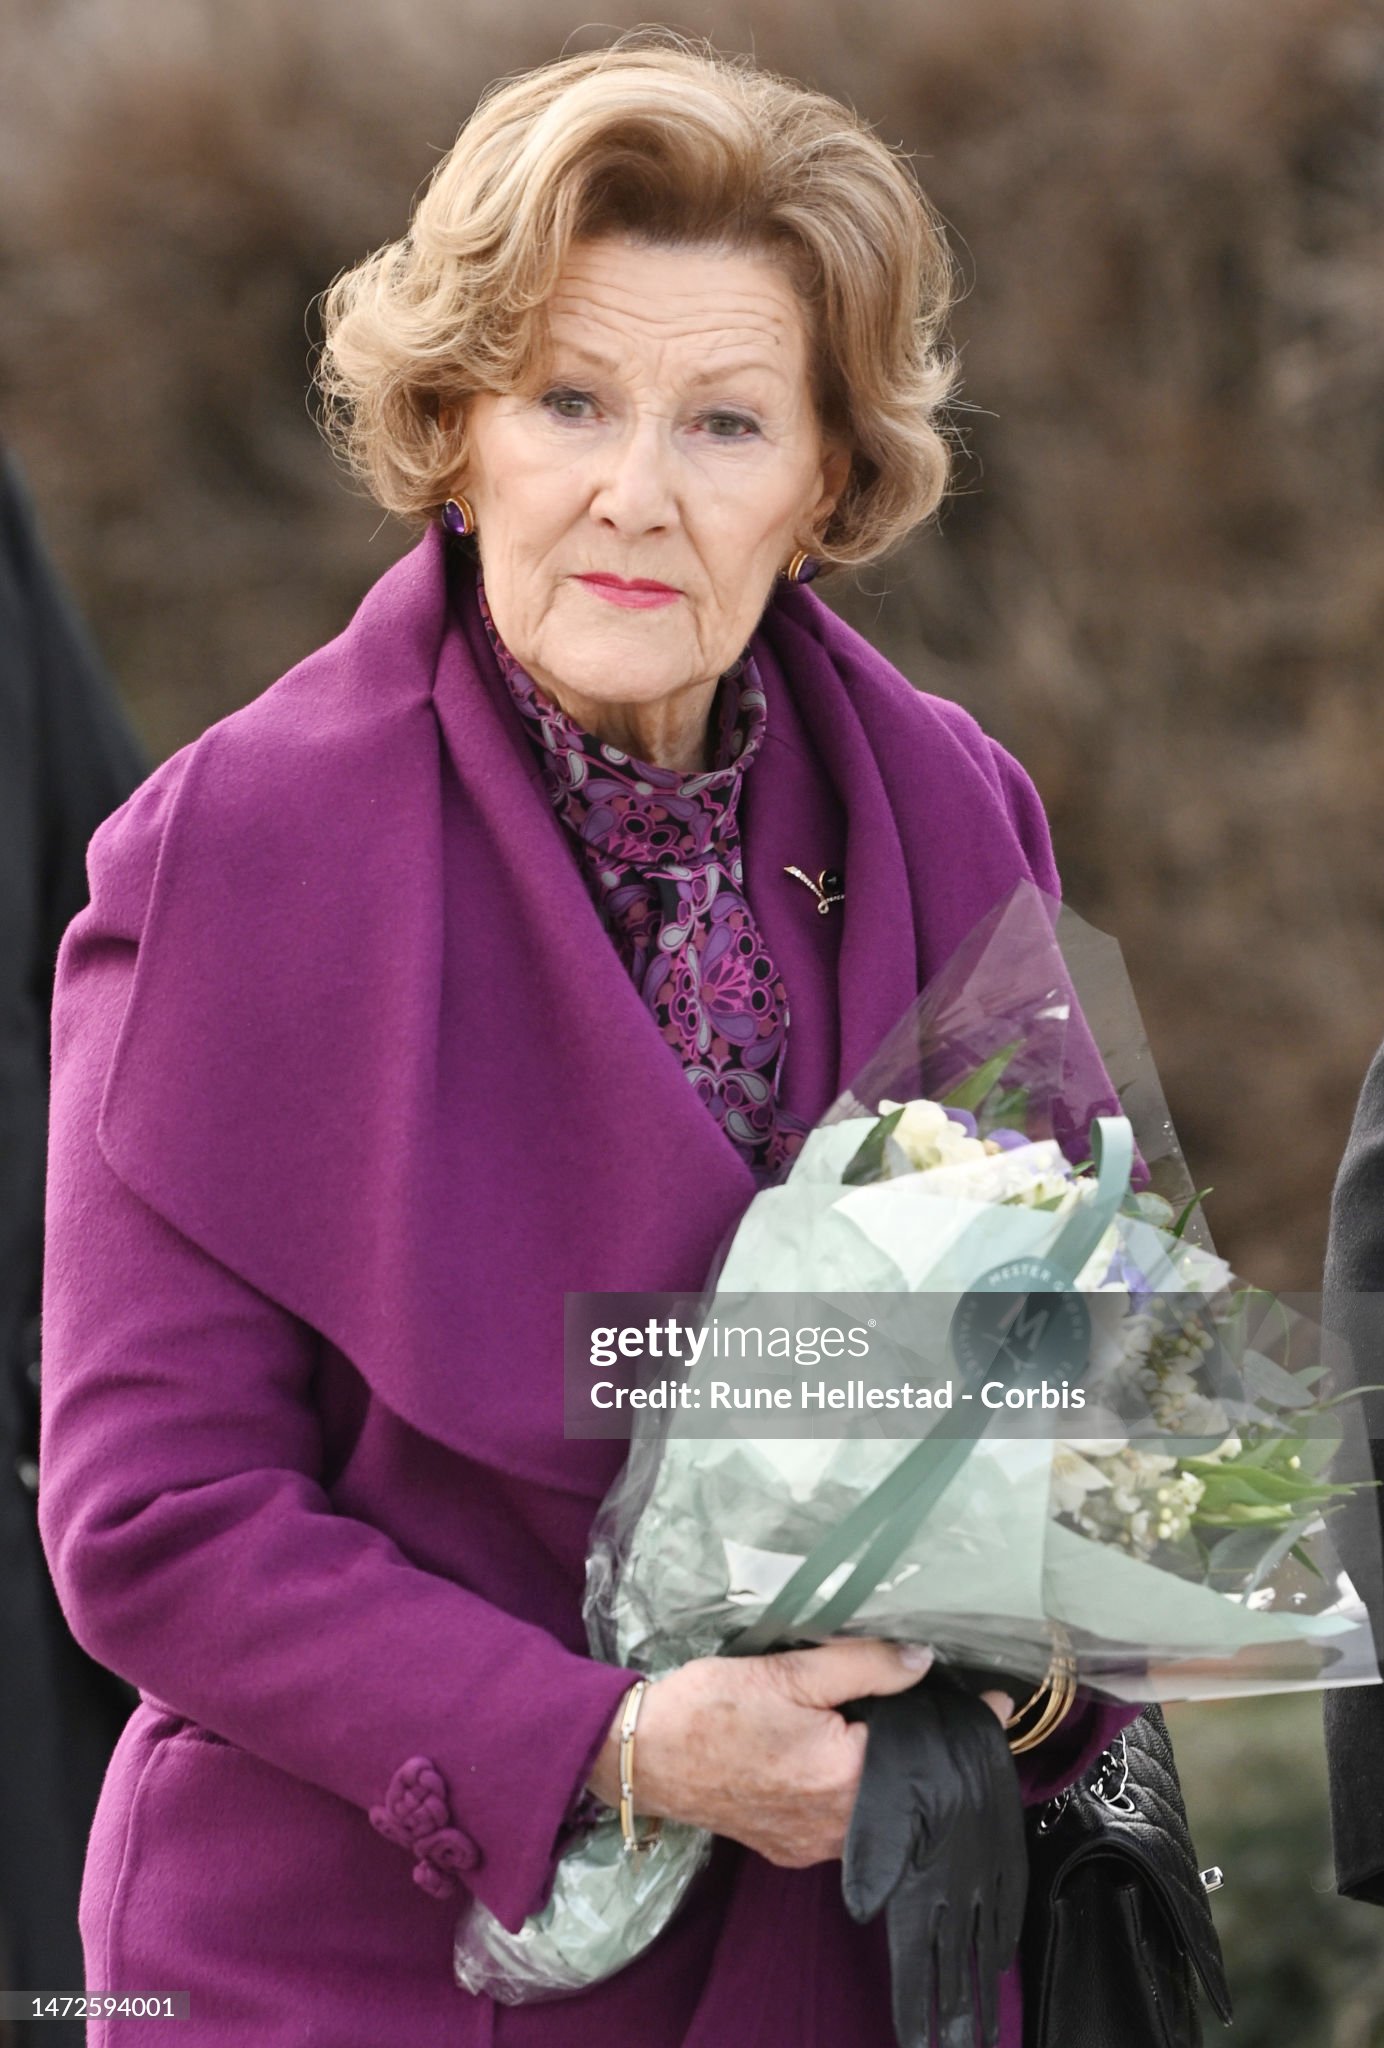 queen-sonja-of-norway-attends-festival-of-nature-photography.jpg